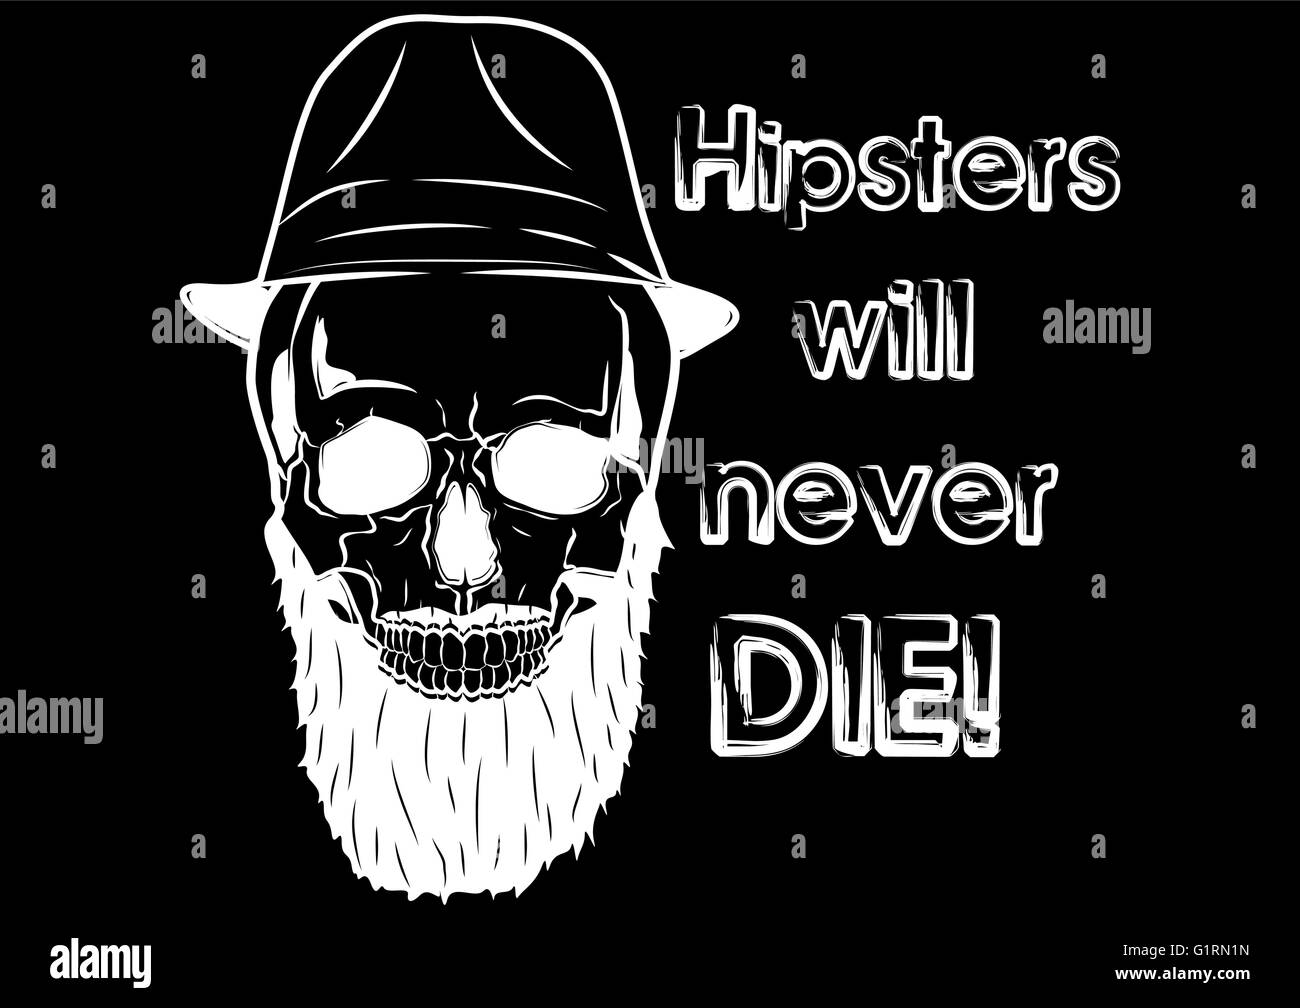 Illustration Vector Graphic Skull Pirate Hipster for the creative use in graphic design Stock Vector